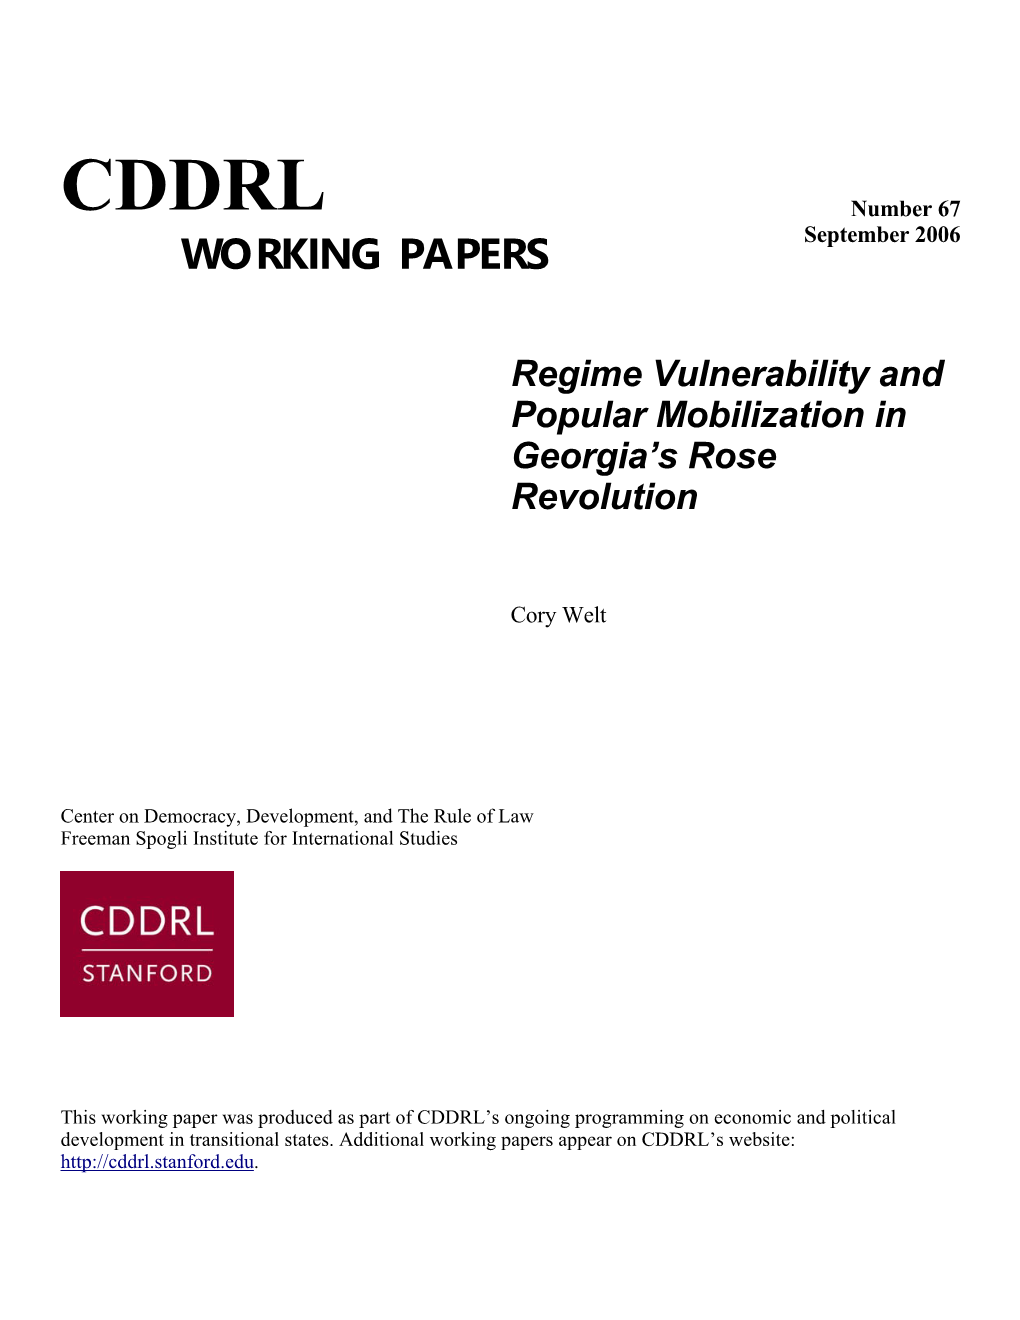 CDDRL Number 67 WORKING PAPERS September 2006